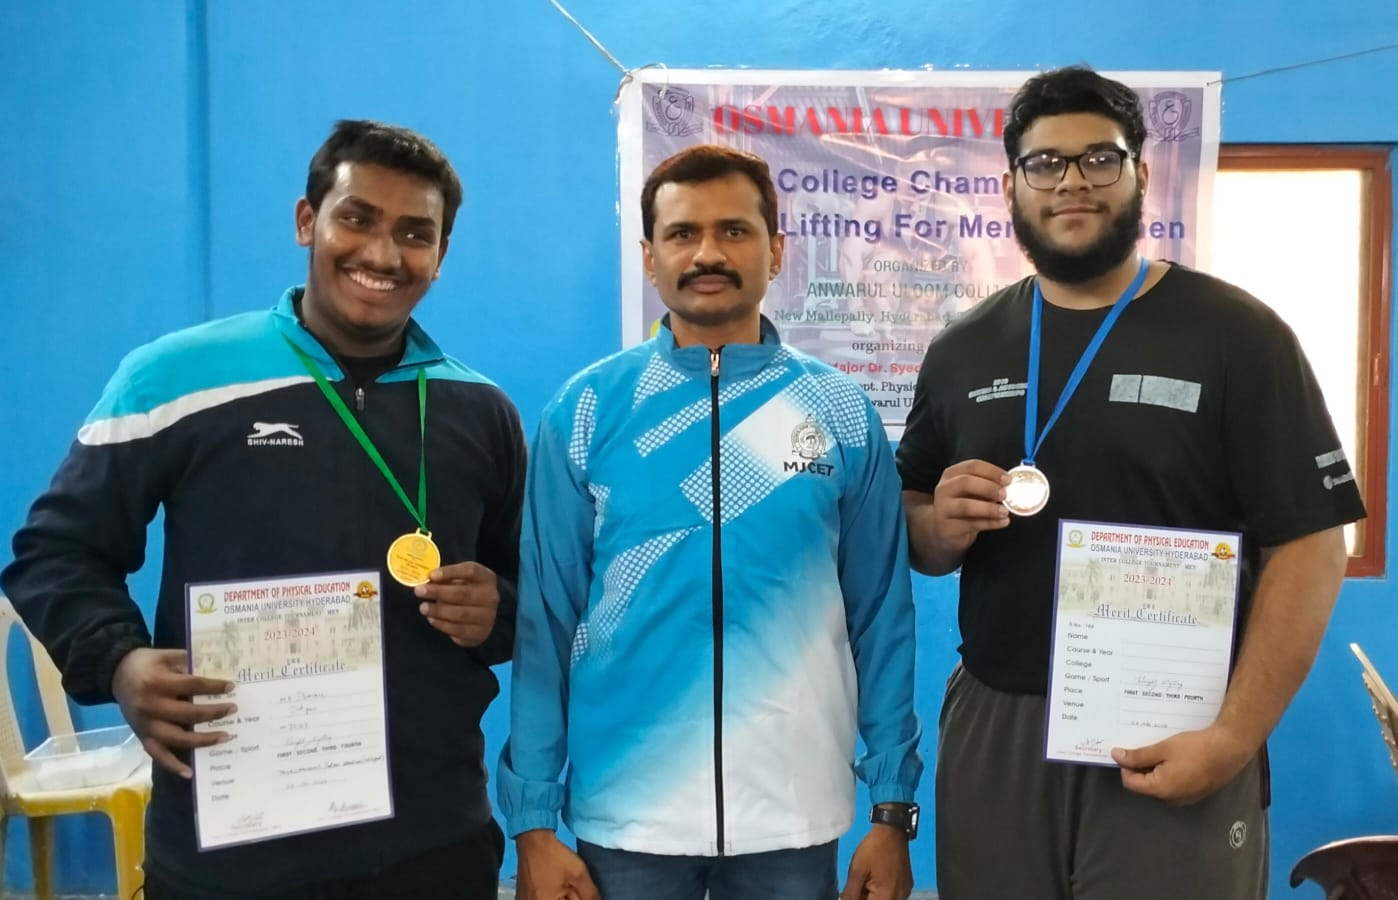 Osmania University Inter College Tournament Weightlifting Championship (M) 2023-24 held at Prof. Jay Shankar Indoor Stadium, Lalapet, Hyderabad on 28-11-2023.
Muffakham Jah College of Engineering & Technology Student's performed very well and won 2 Silver medals 🥈🥈 

Mohammad Ismail CSE 2nd Yr. (Wt. C 96)
Mohammad Saif AI/ML 3rd Yr.
(Wt. C 109+)